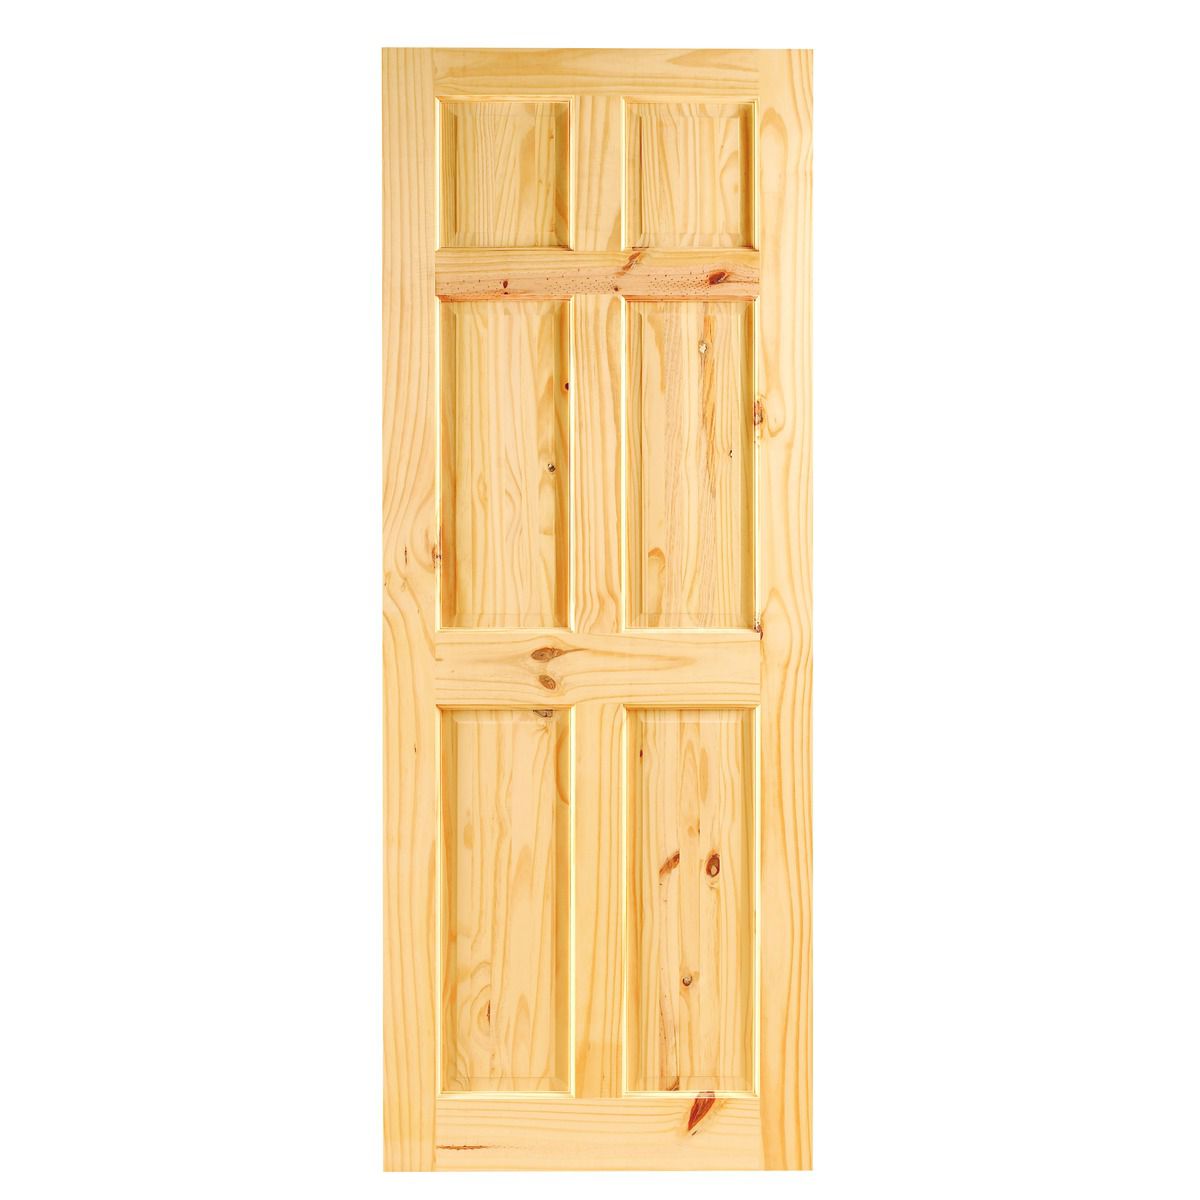 Image of Wickes Lincoln Knotty Pine 6 Panel Internal Door - 1981 x 610mm